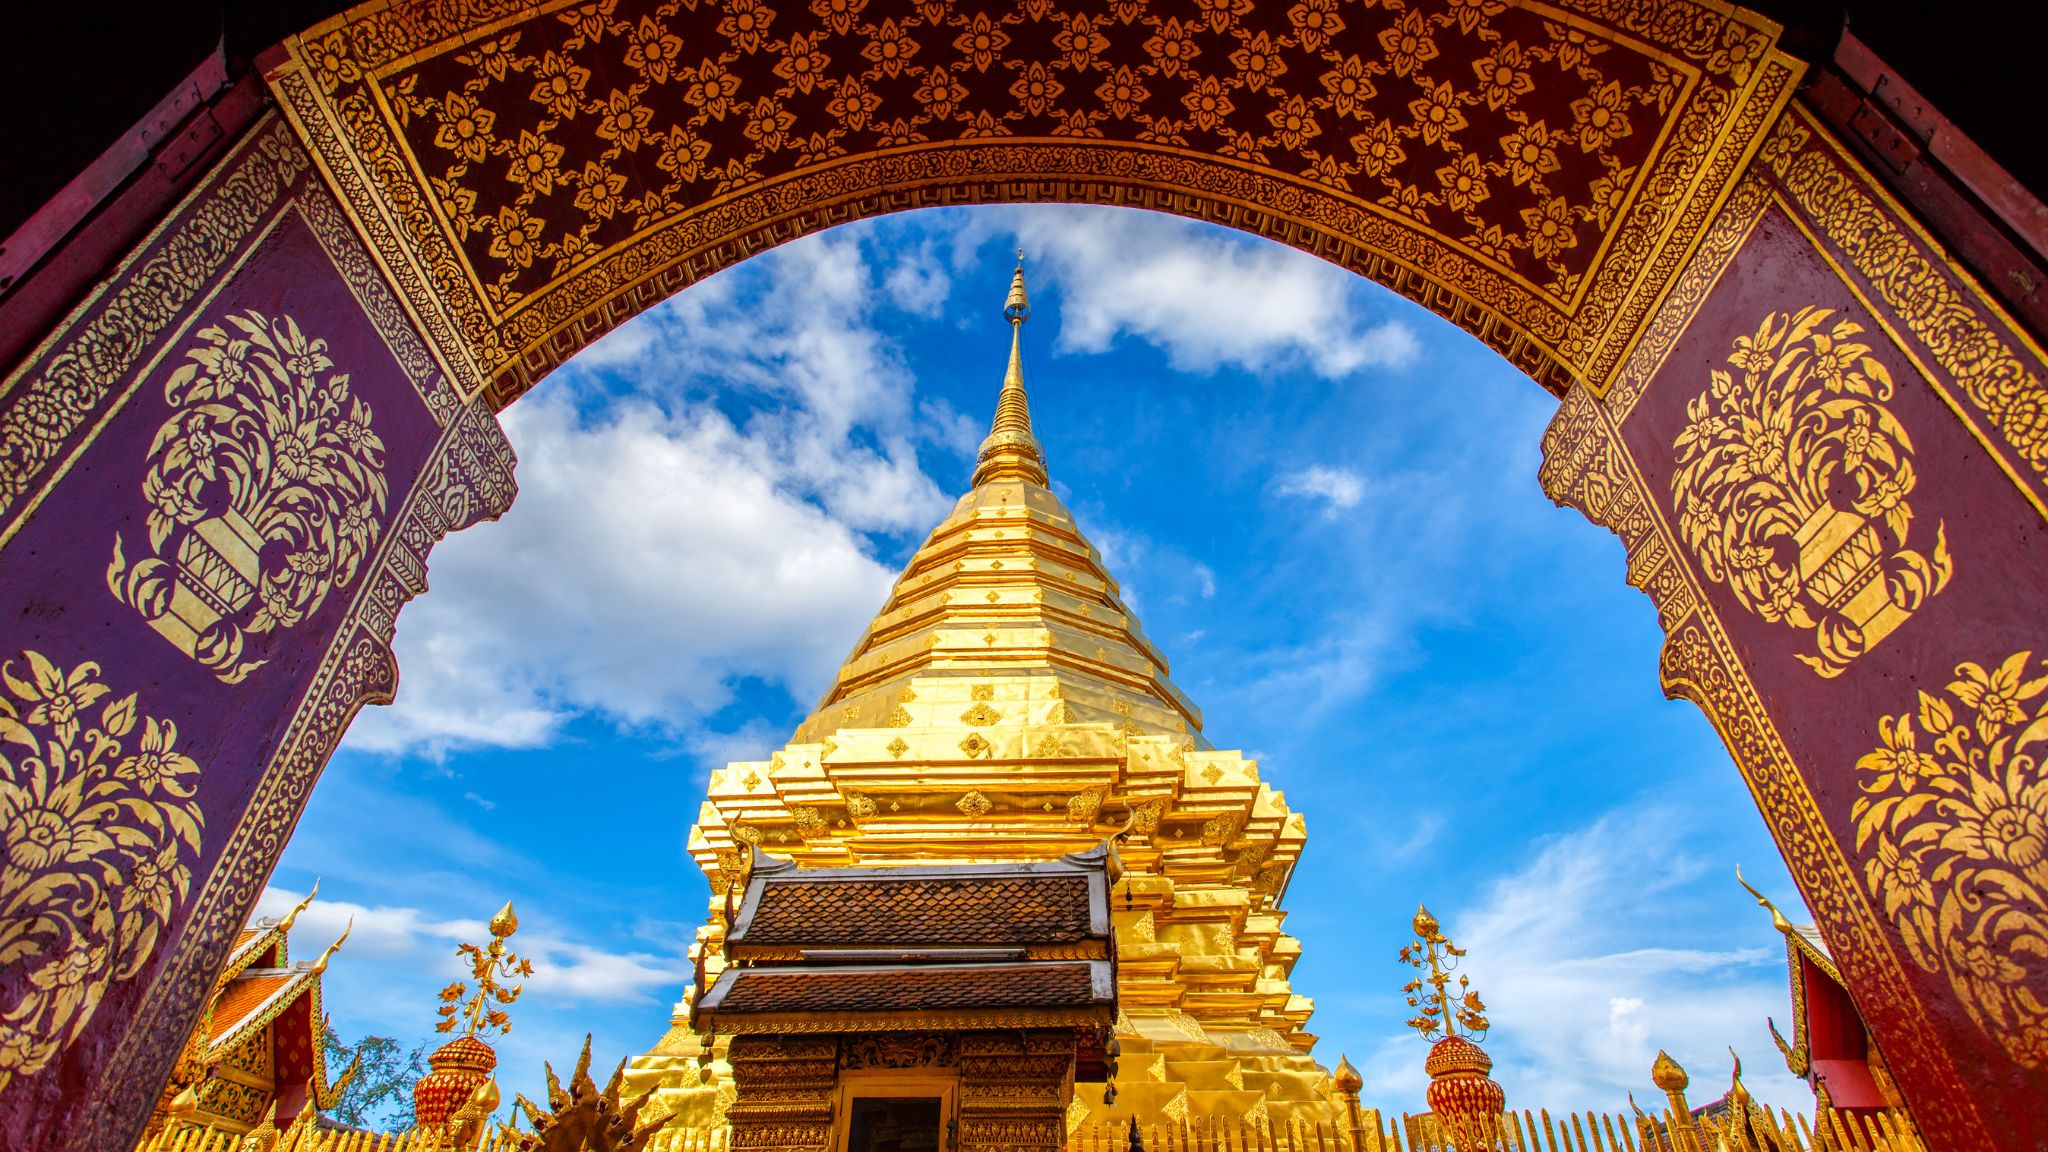 Day 8 Admire The Beauty Of Wat Phra That Doi Suthep